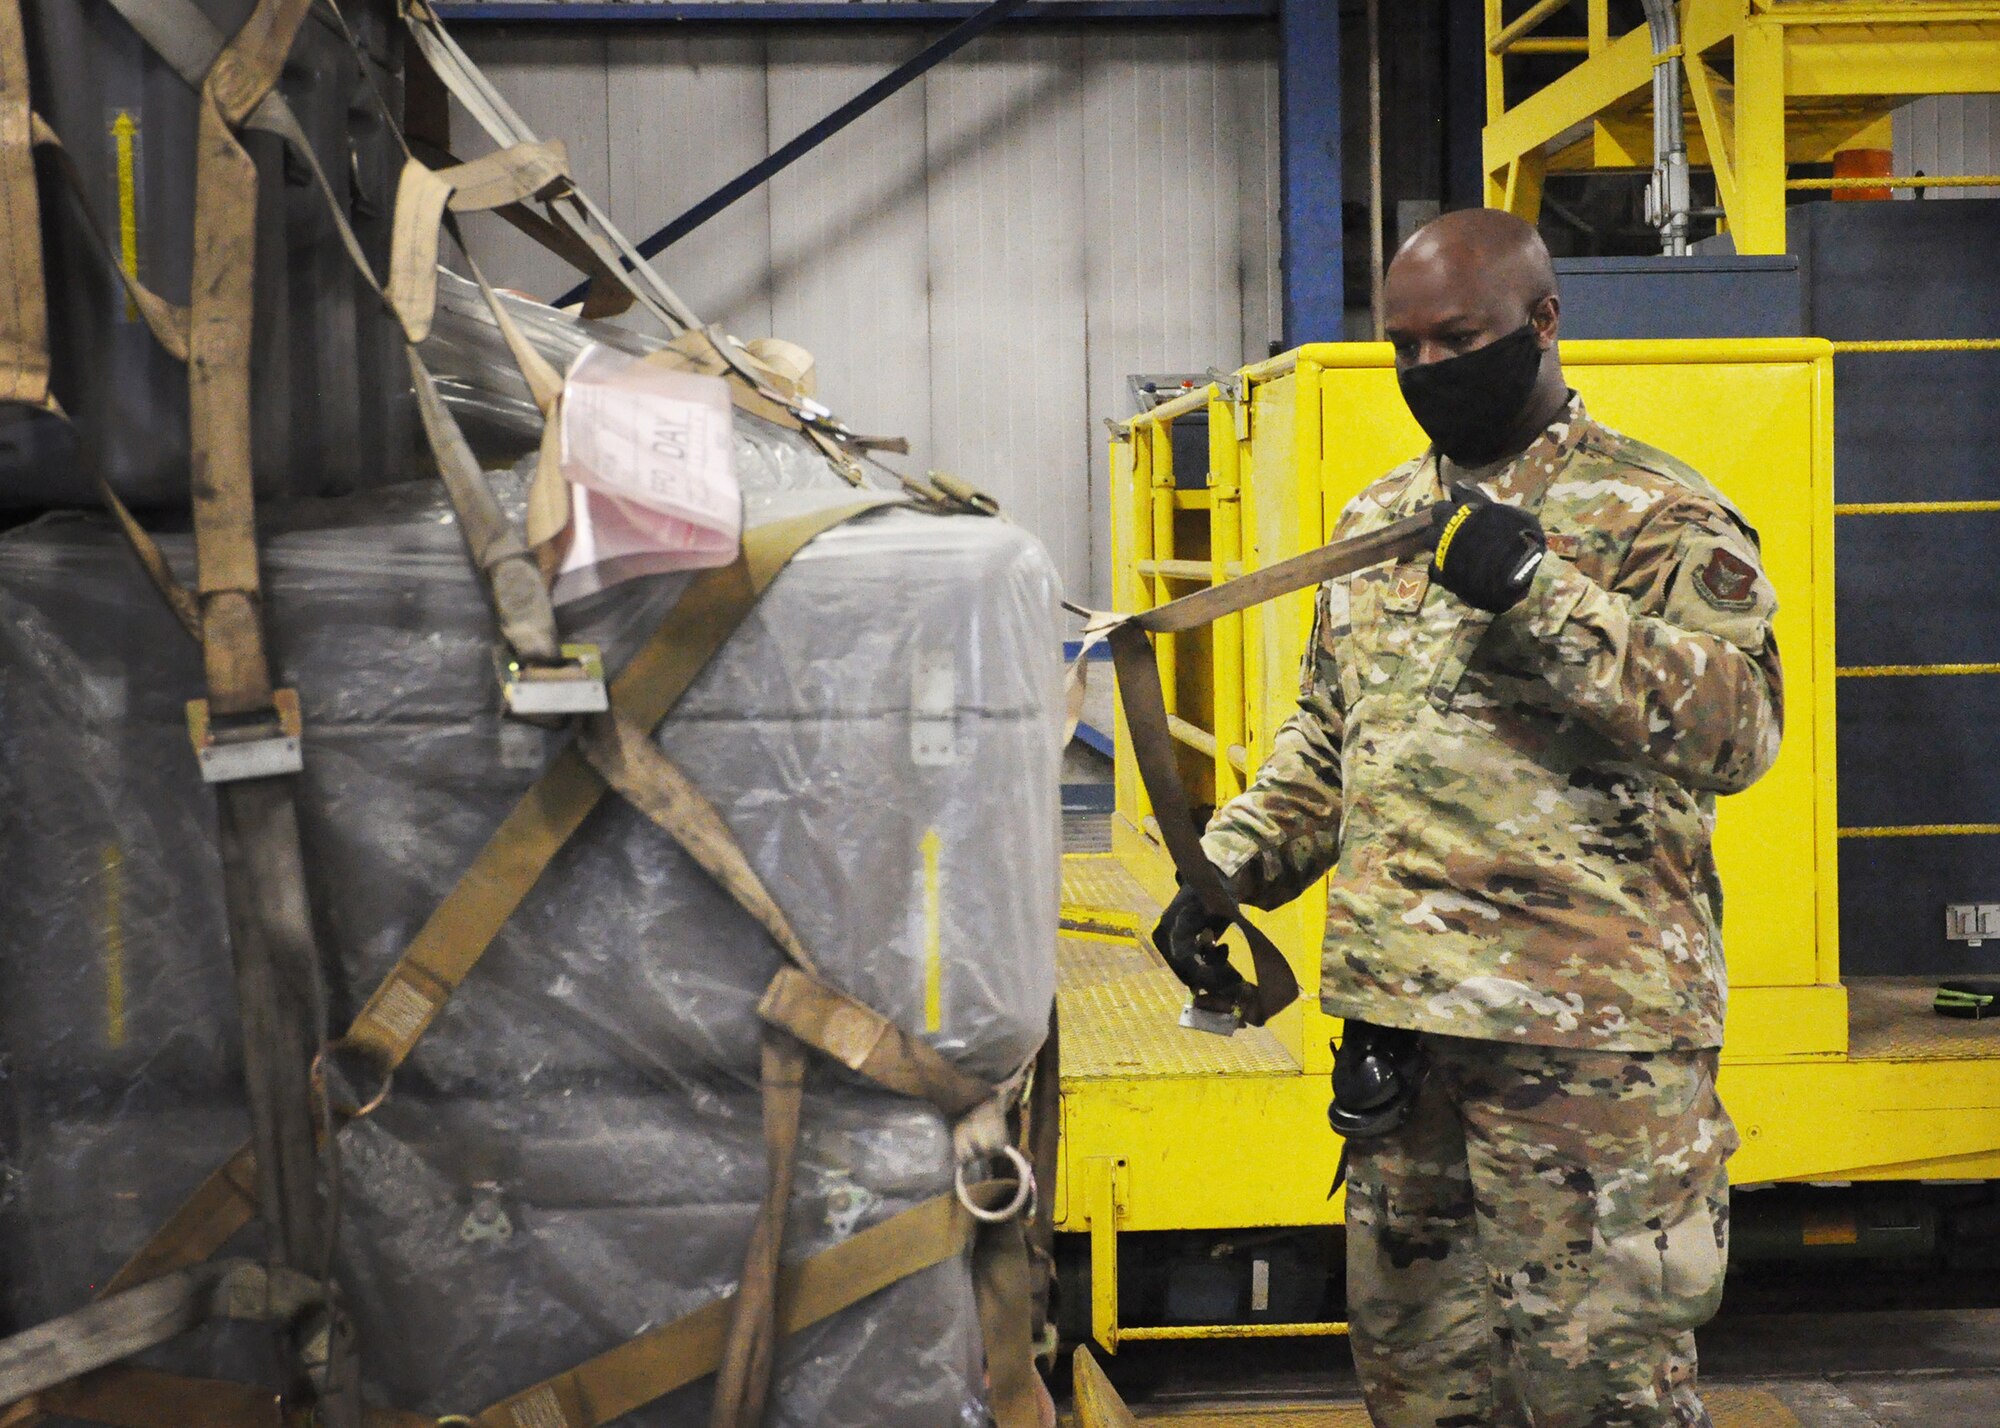 Staff Sgt. Dylan Lewis-Lee, 87th Aerial Port Squadron ramp operations specialist, tightens the net on a training pallet during the 87th Aerial Port Squadron’s semi-annual Port Dawg Challenge Oct. 17, 2020. Cargo is prepared for military airlift using strict guidelines based on weight, height, shape and transportation priority, so Port Dawgs must be proficient in numerous methods of securing cargo with nets, chains and straps.